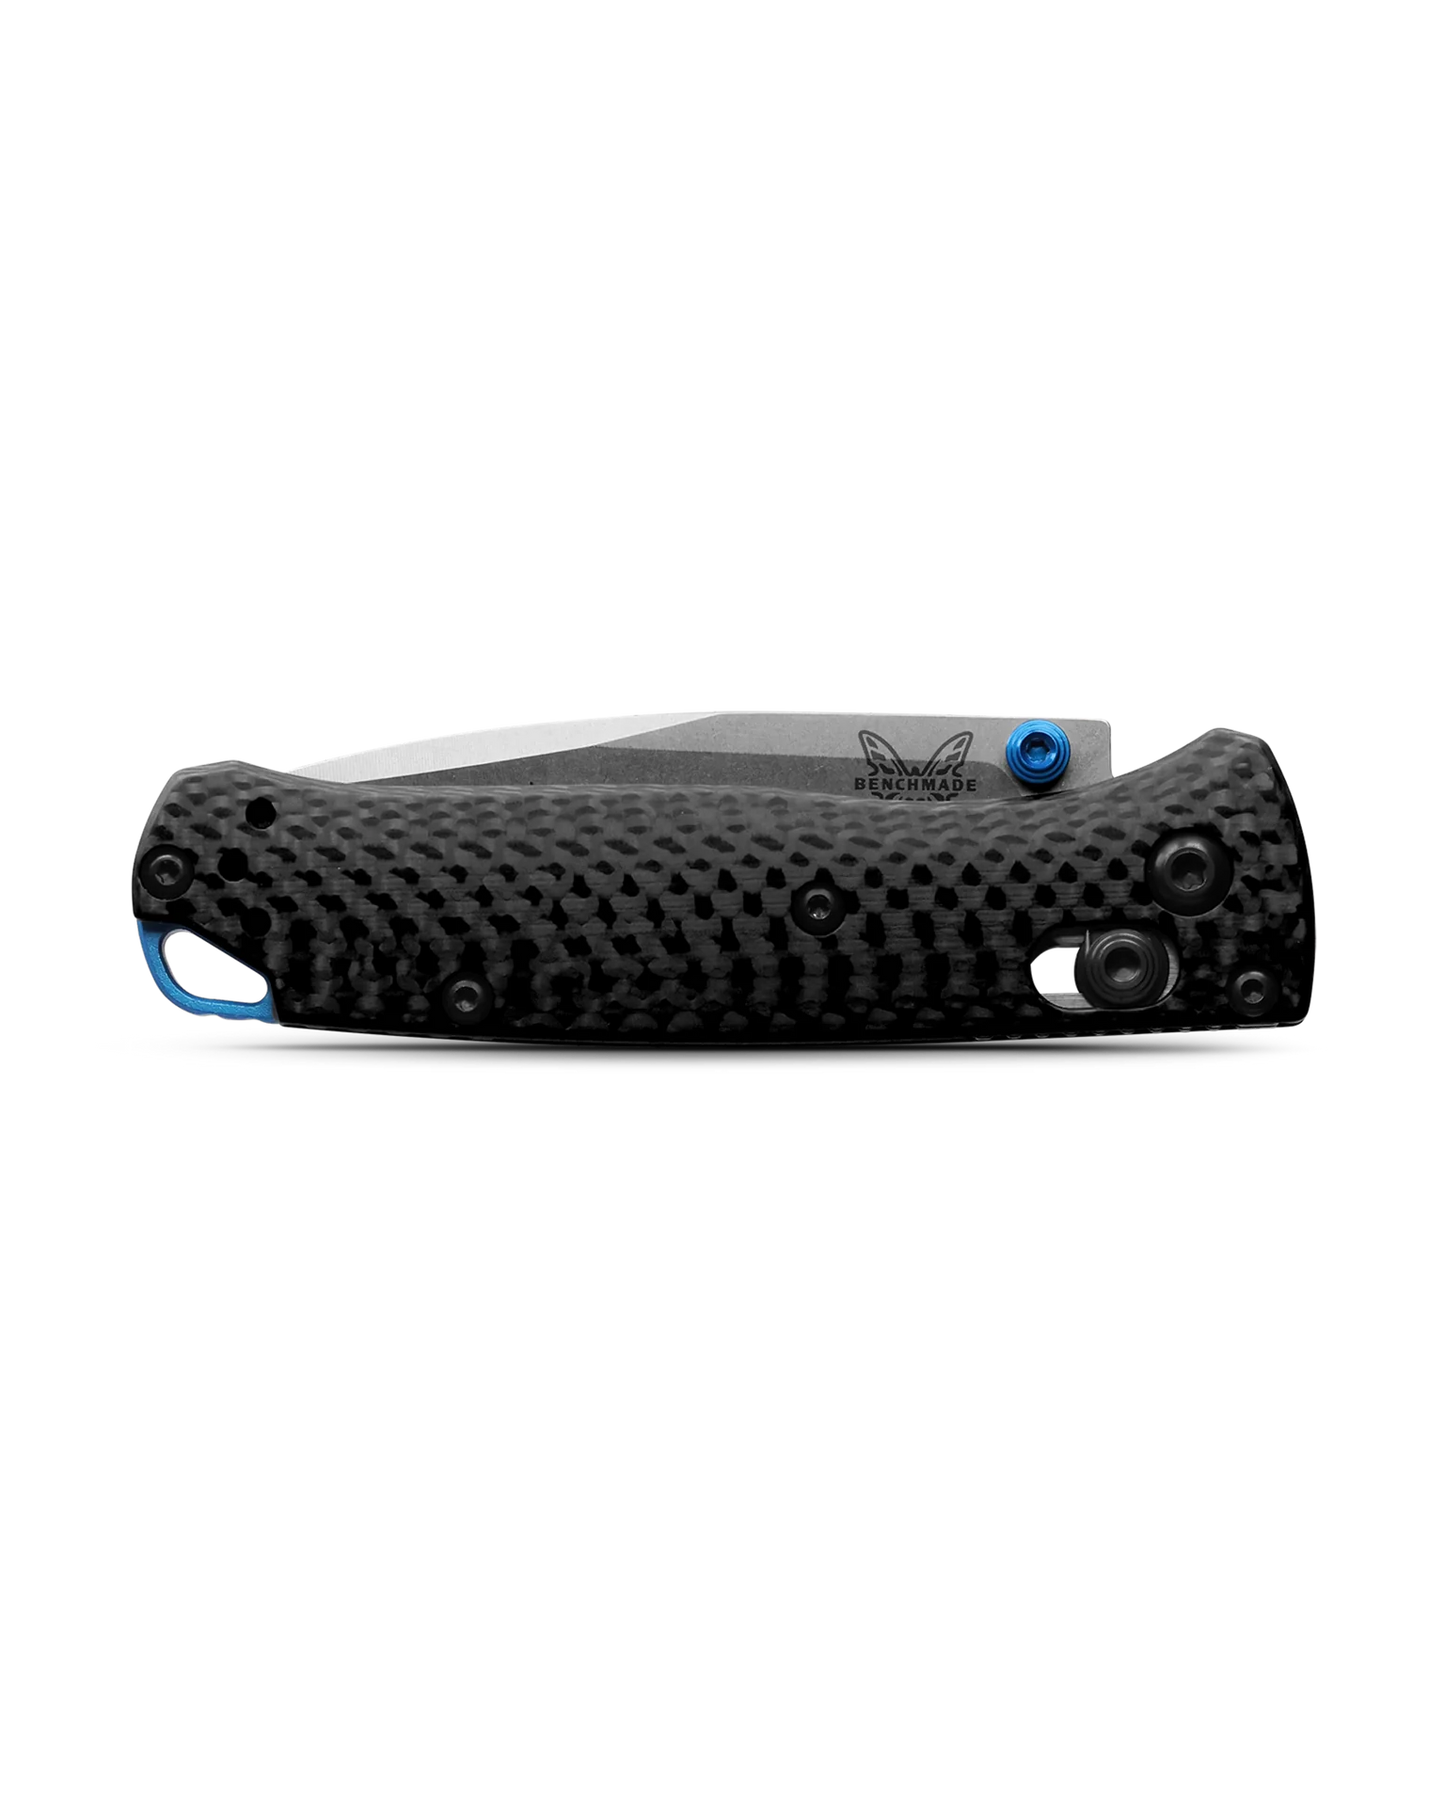 Benchmade 533-3 MINI BUGOUT, סיבי פחמן, ציר